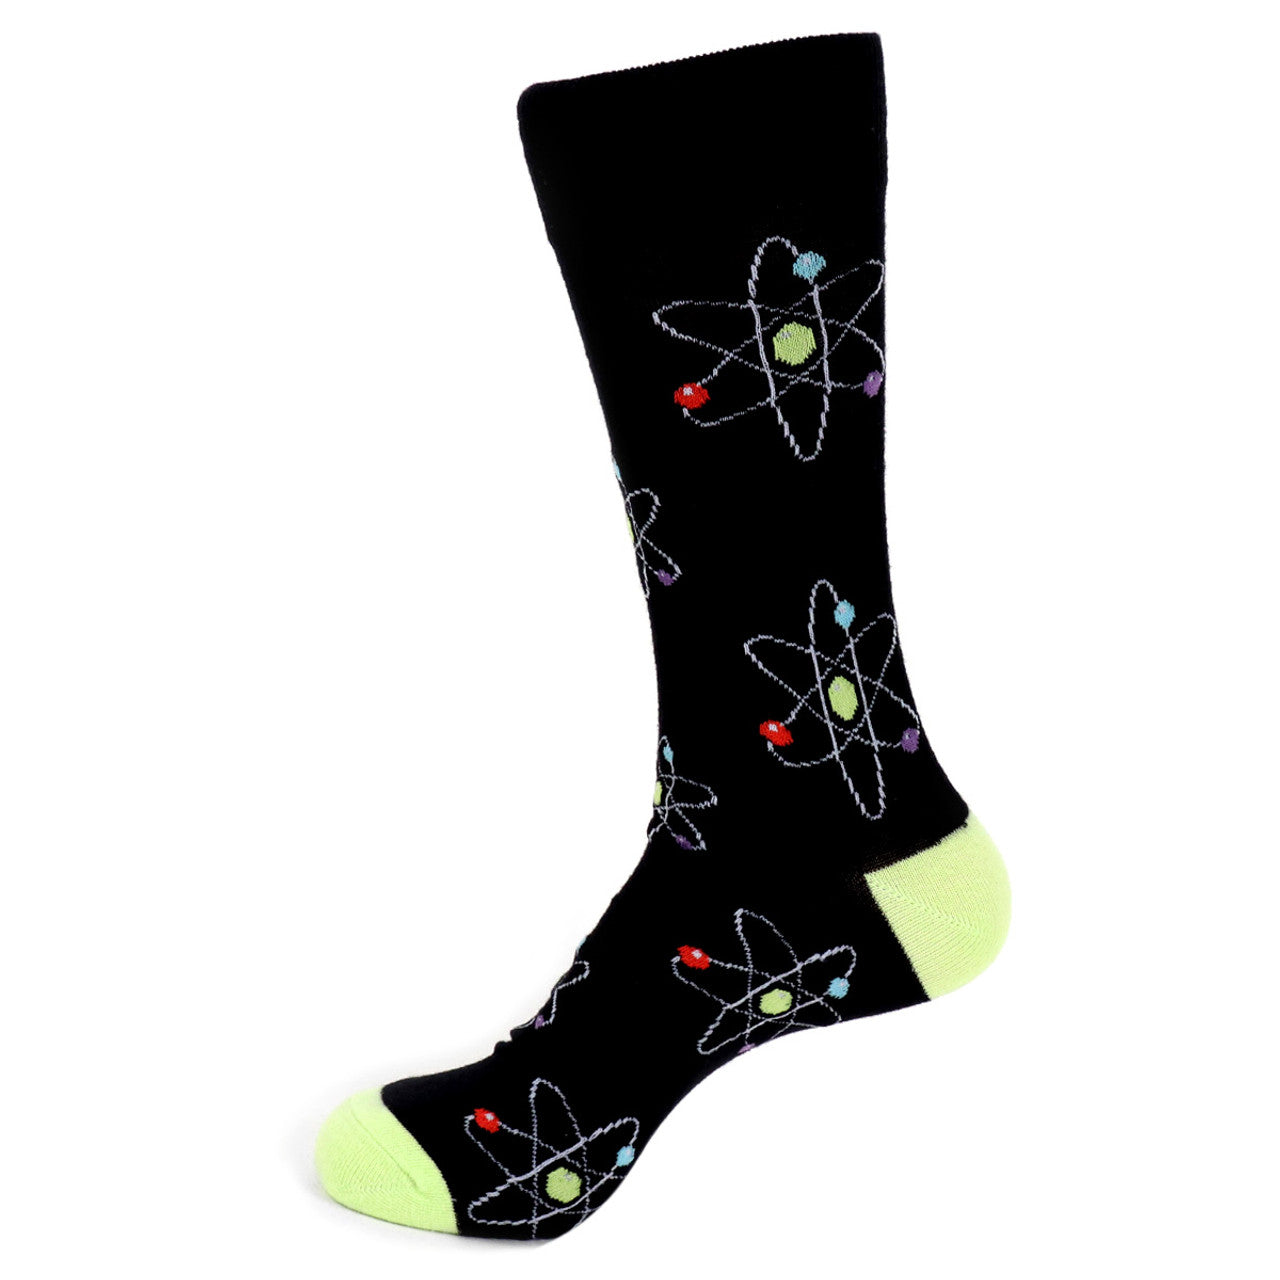 Men's Chemistry Crew Socks - Perfect or the science enthusiast!